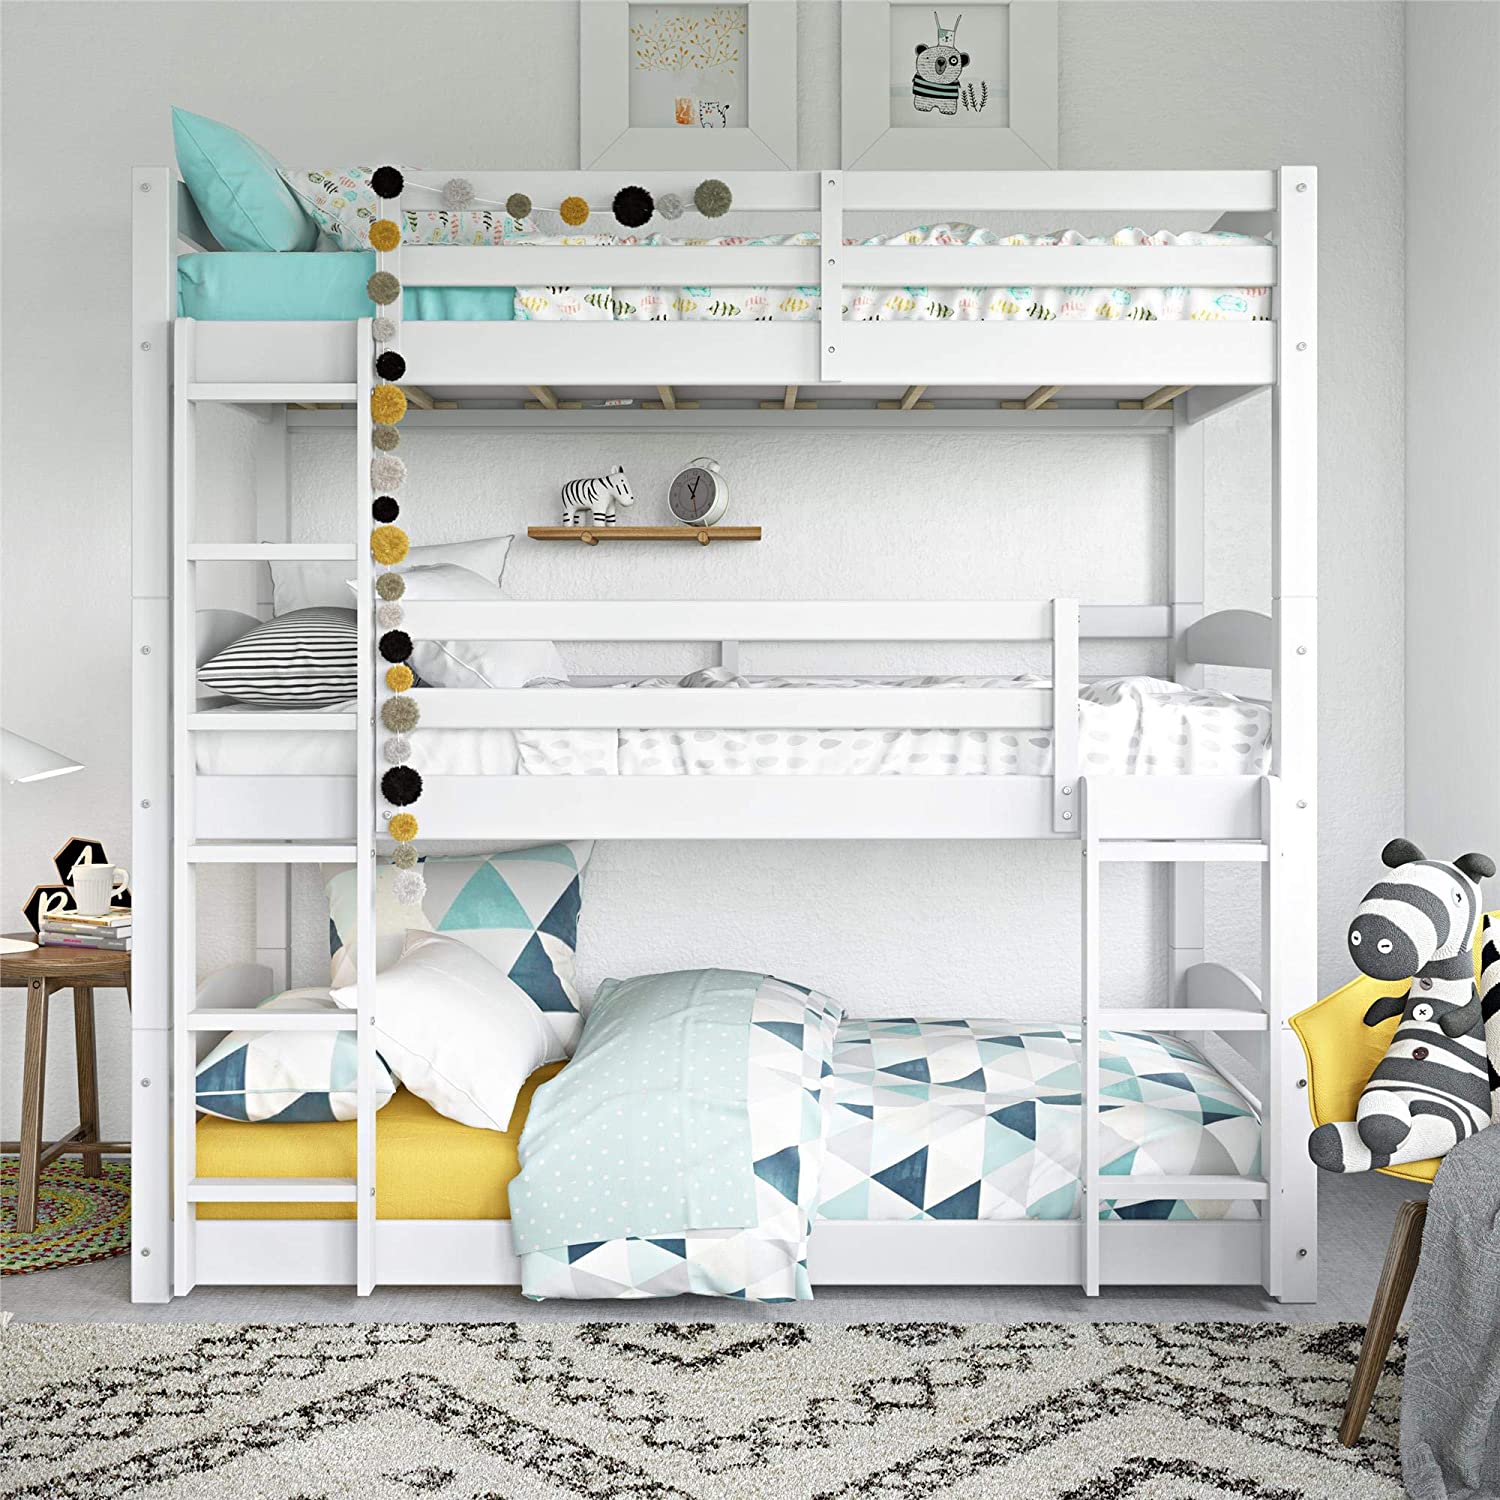 25 Bunk Beds You Ll Want For Yourself